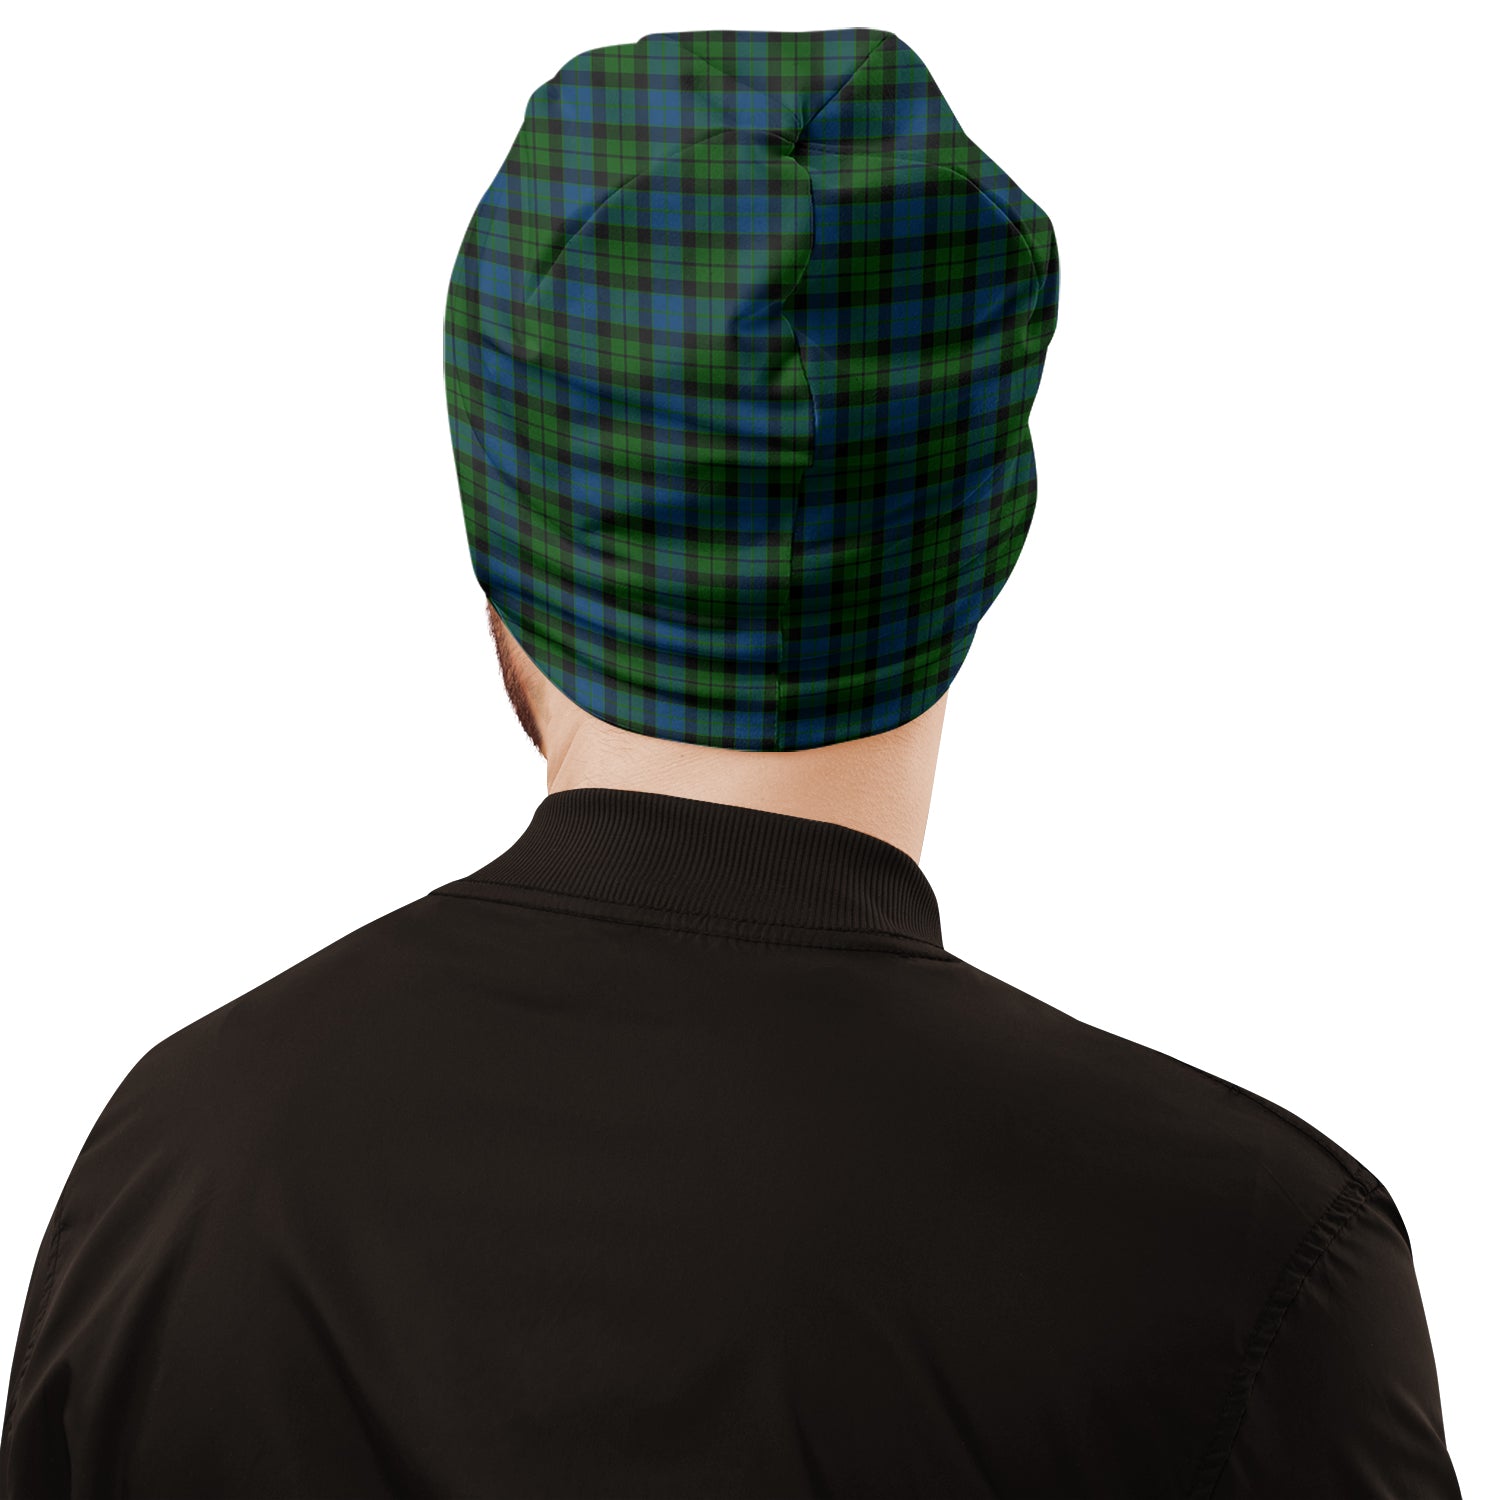 mccoy-tartan-beanies-hat-with-family-crest